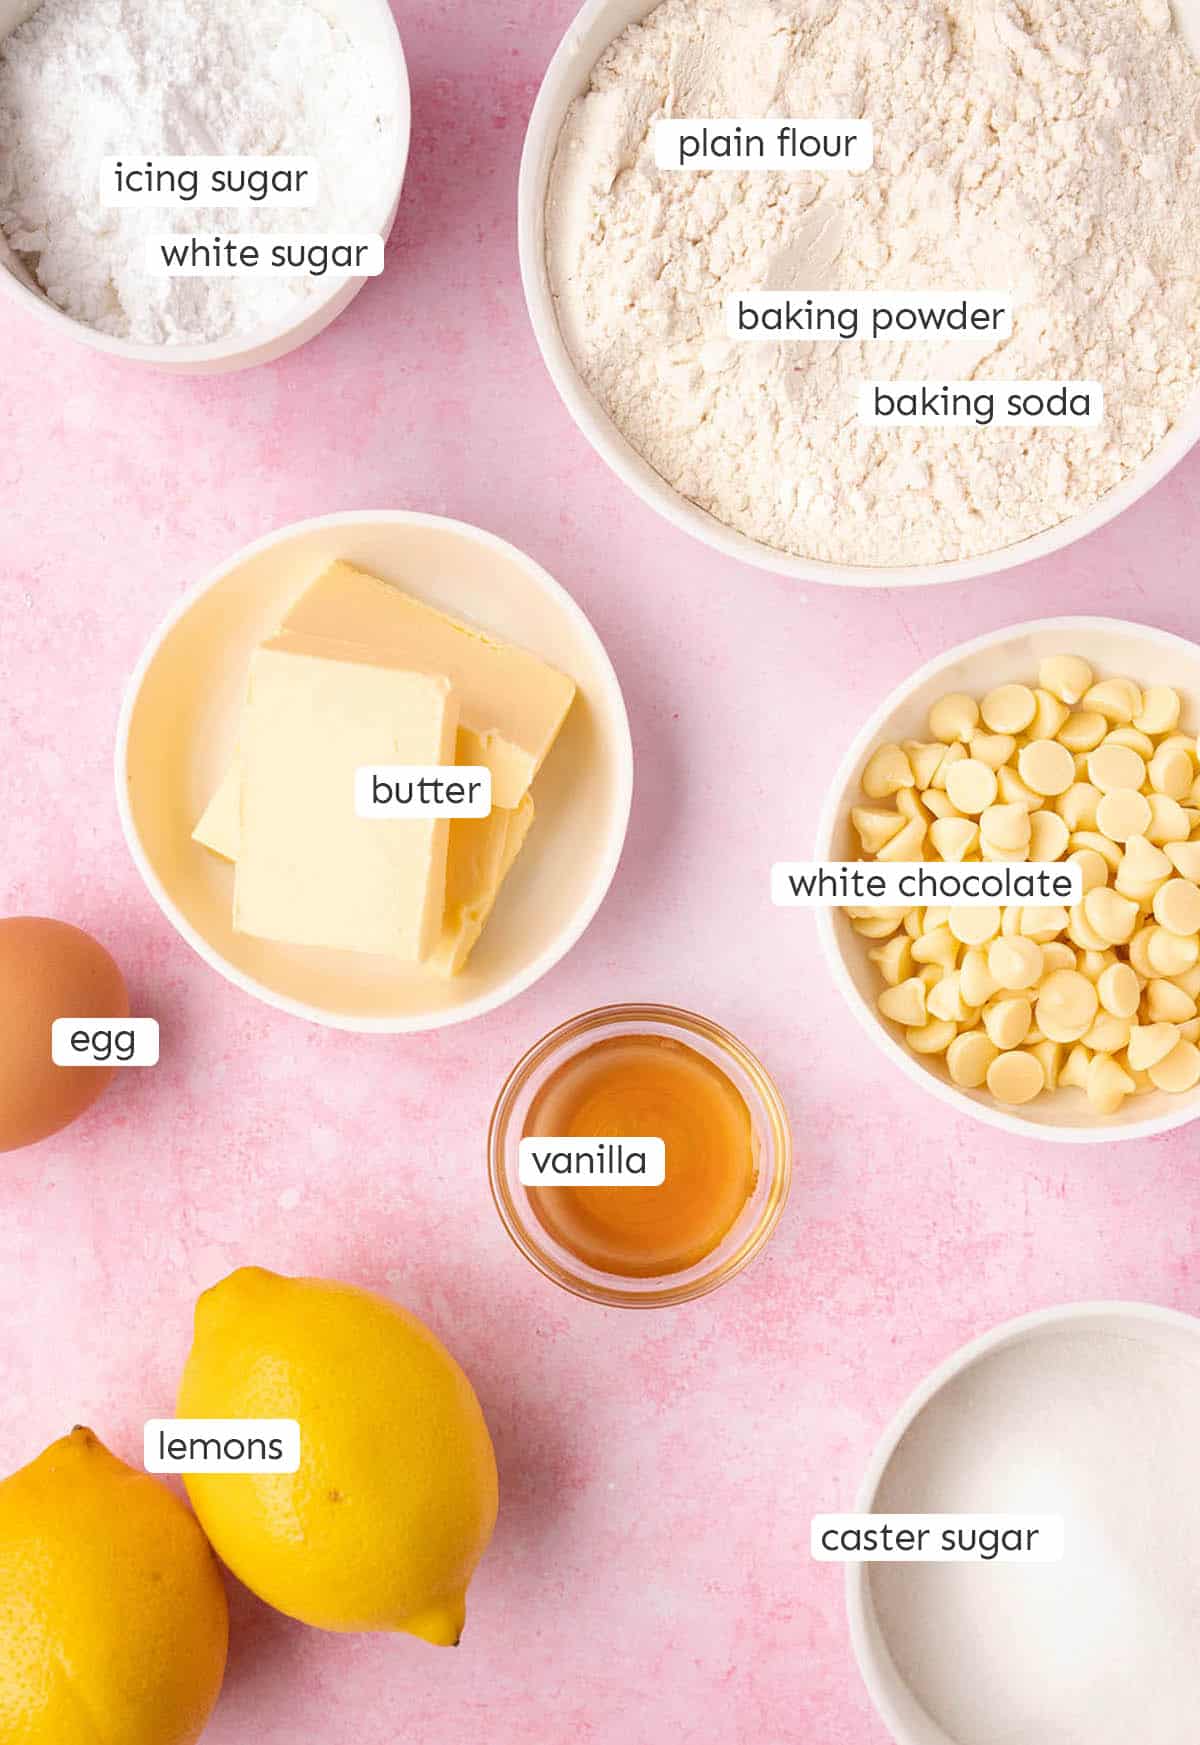 All the ingredients needed to make Lemon Crinkle Cookies from scratch on a pink backdrop.